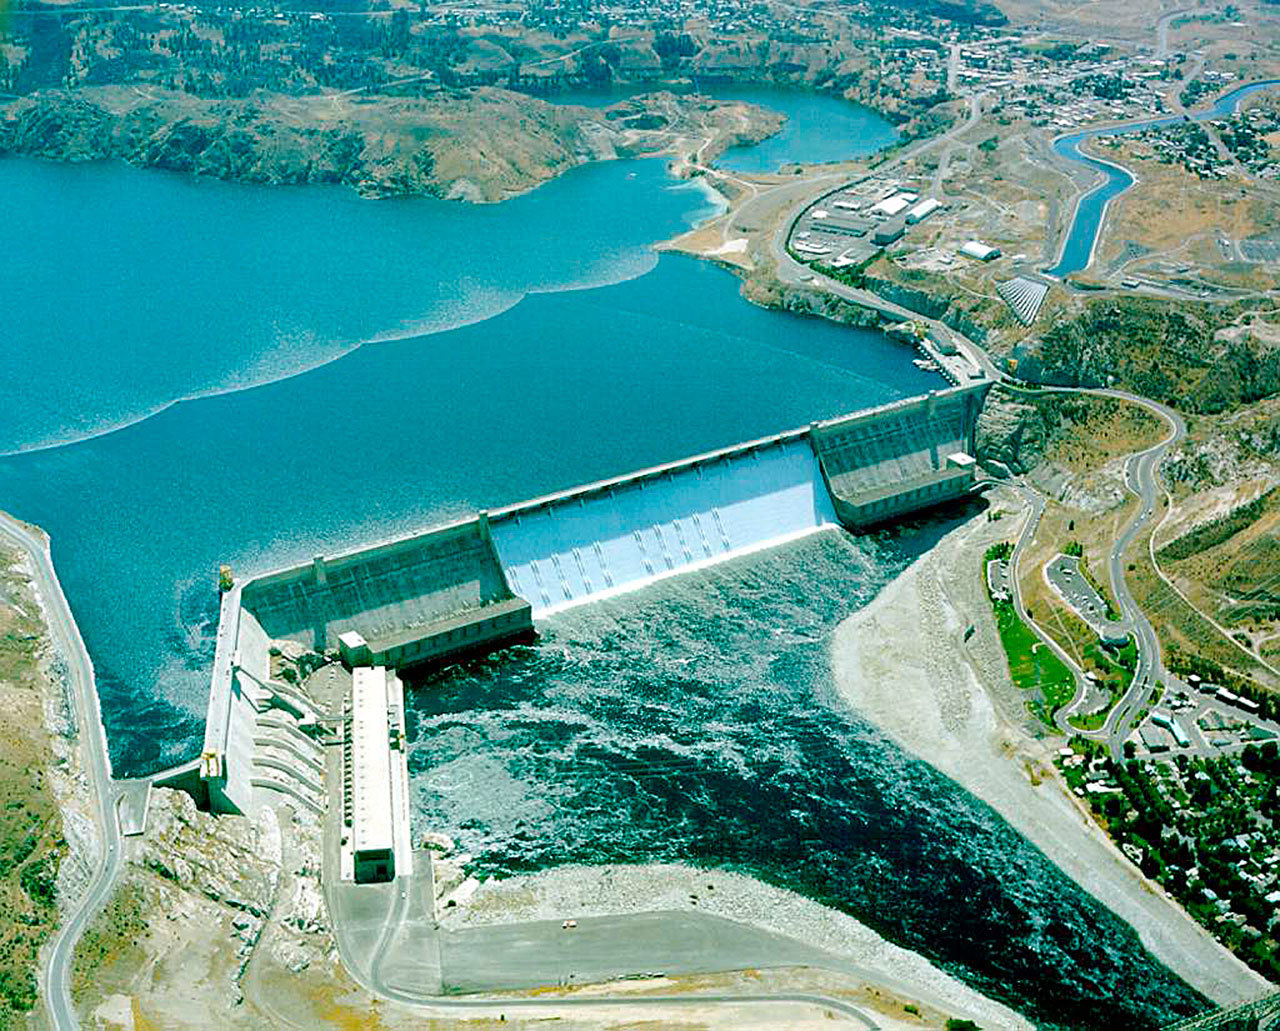 Grand Coulee Dam on the Columbia River in Washington state. (Wikipedia)